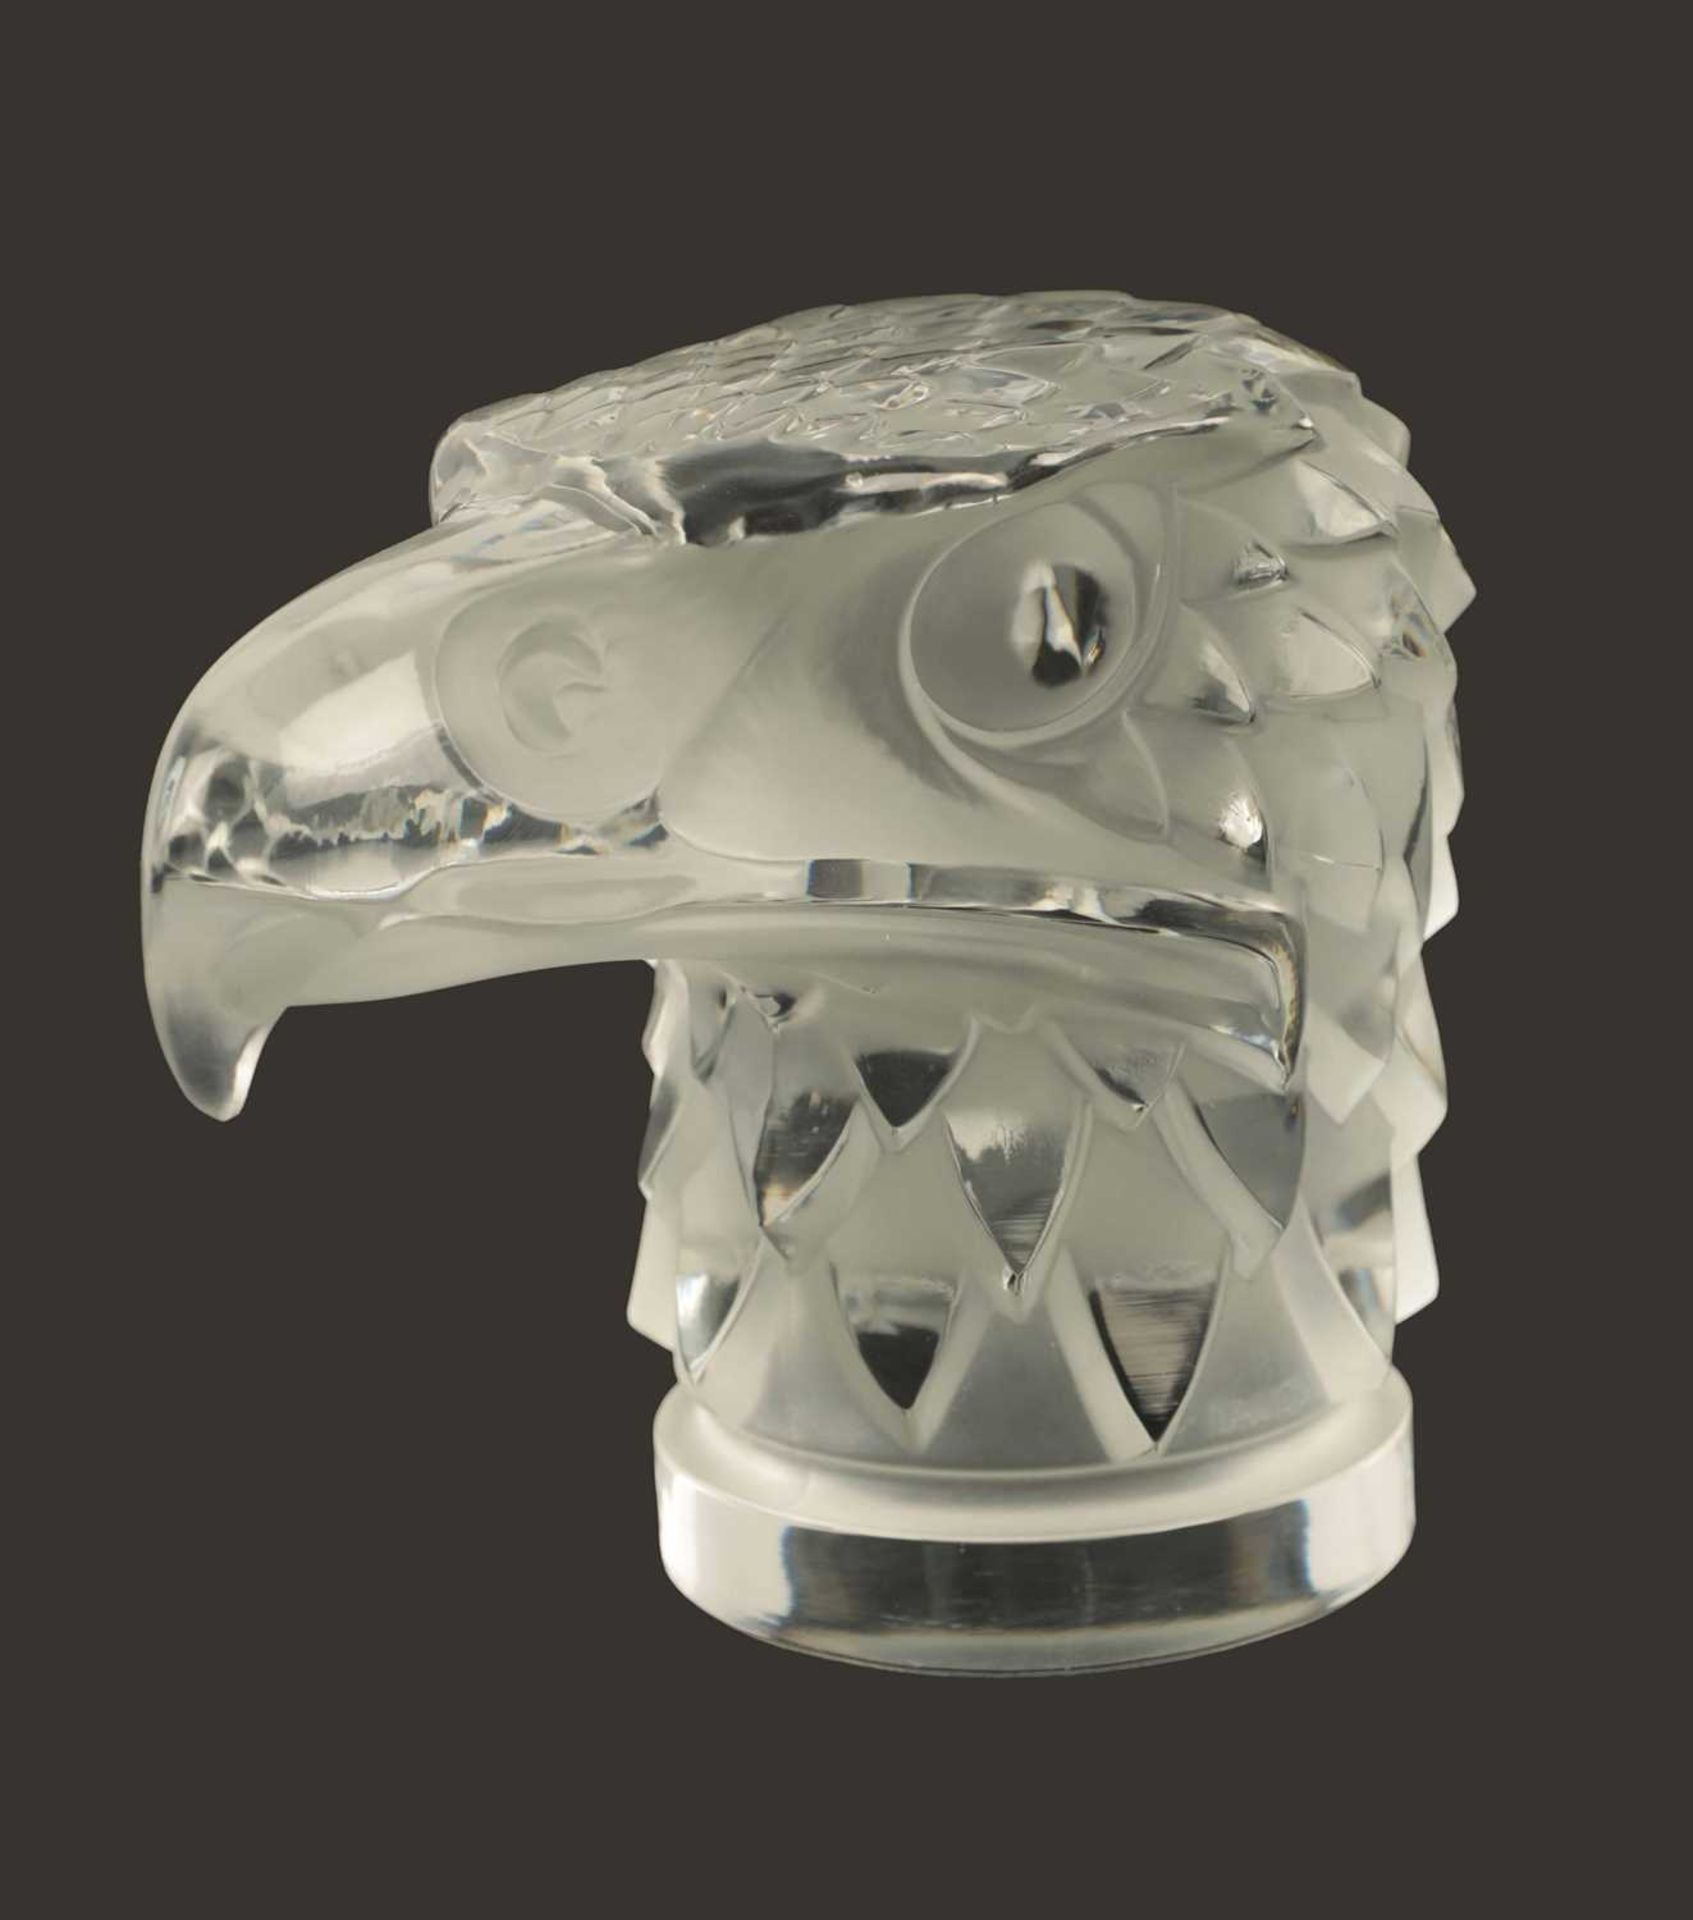 A RENE LALIQUE 'TETE D'AIGLE' CLEAR AND FROSTED GLASS CAR MASCOT - Image 2 of 8